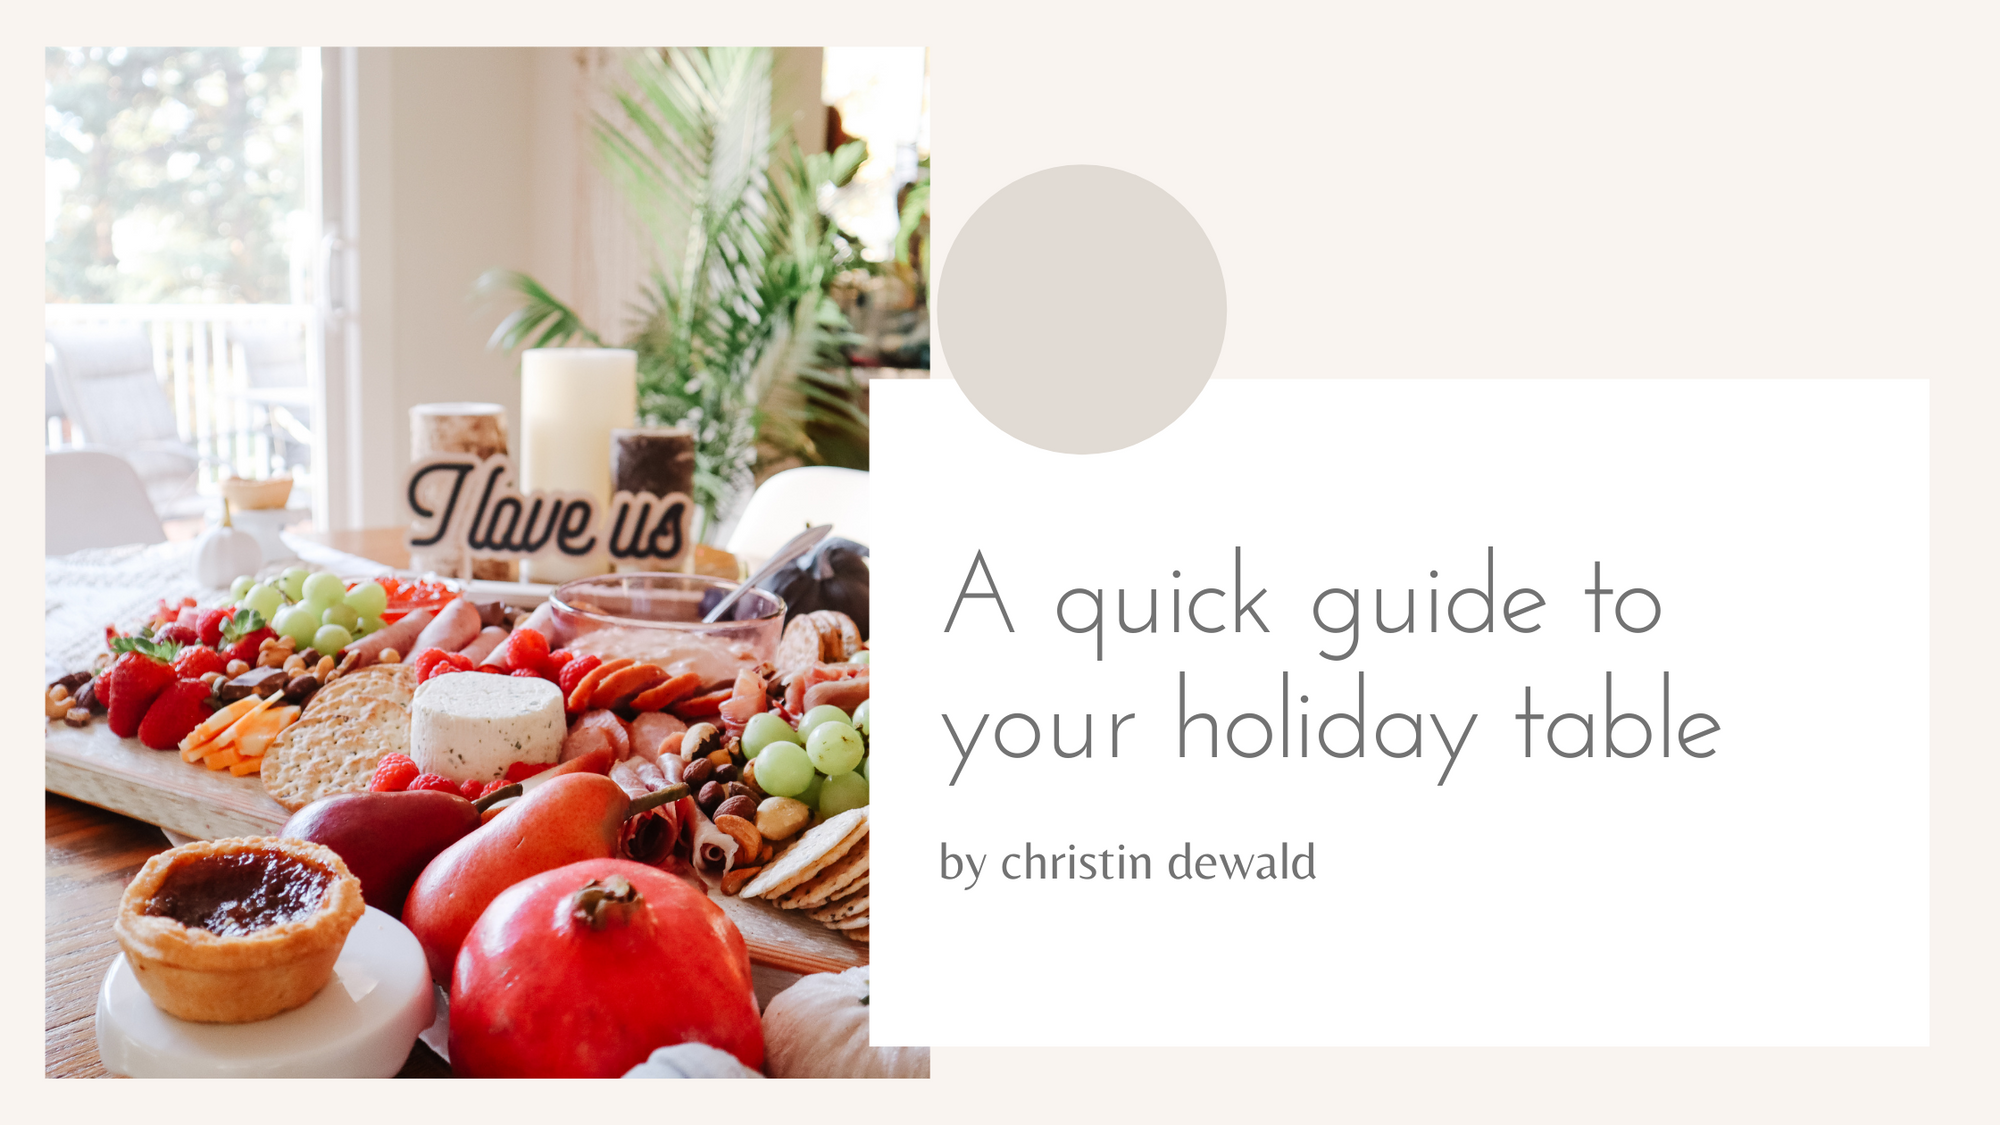 A quick guide to your holiday table